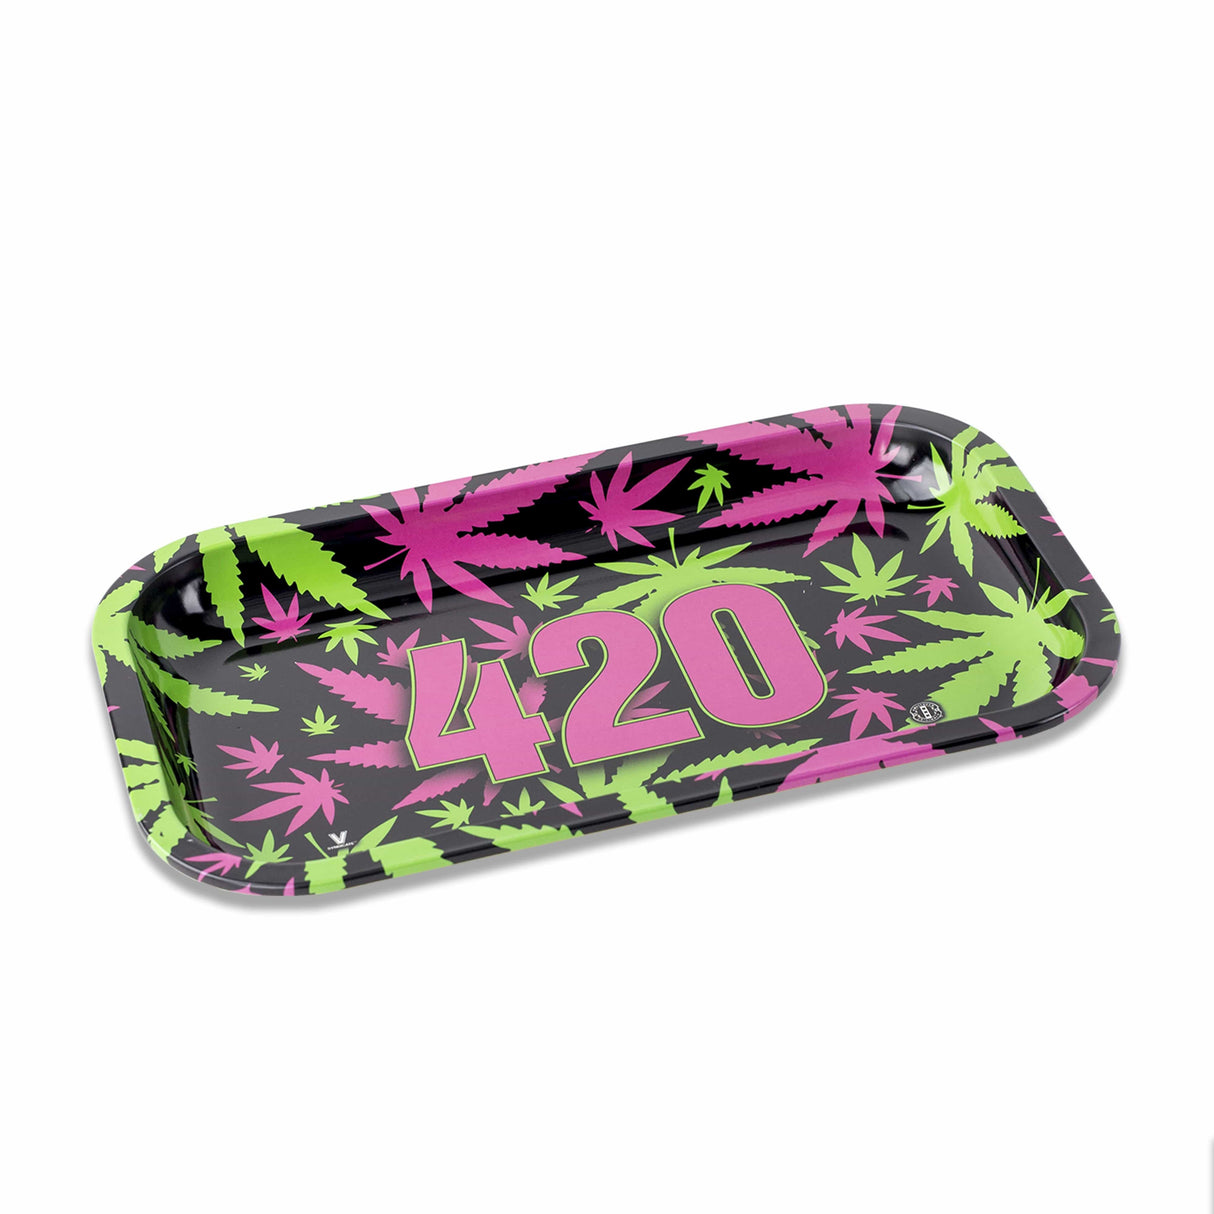 V Syndicate 420 Retro Metal Rollin' Tray with colorful cannabis leaf design - top view